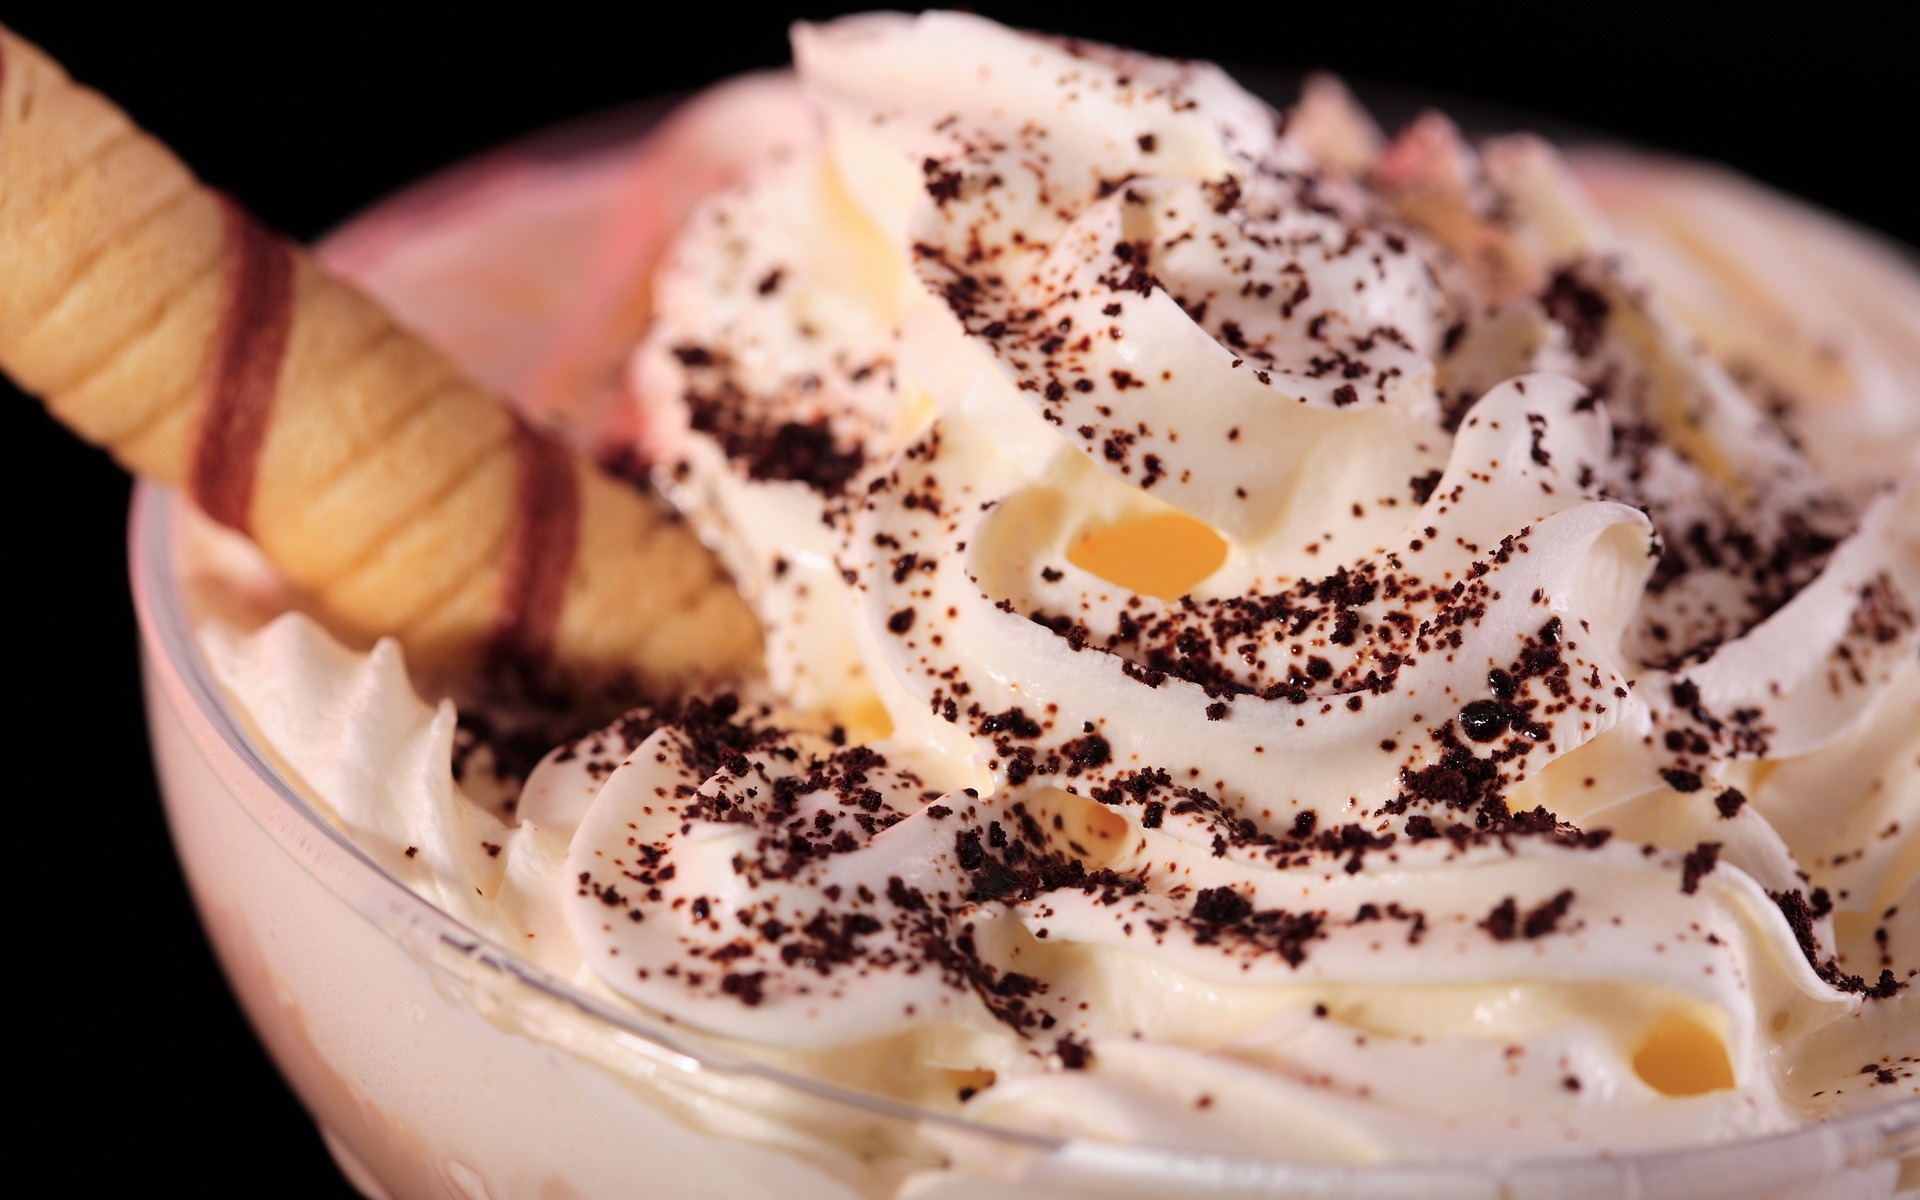 Ice cream with chocolate crumbs wallpapers and images   wallpapers